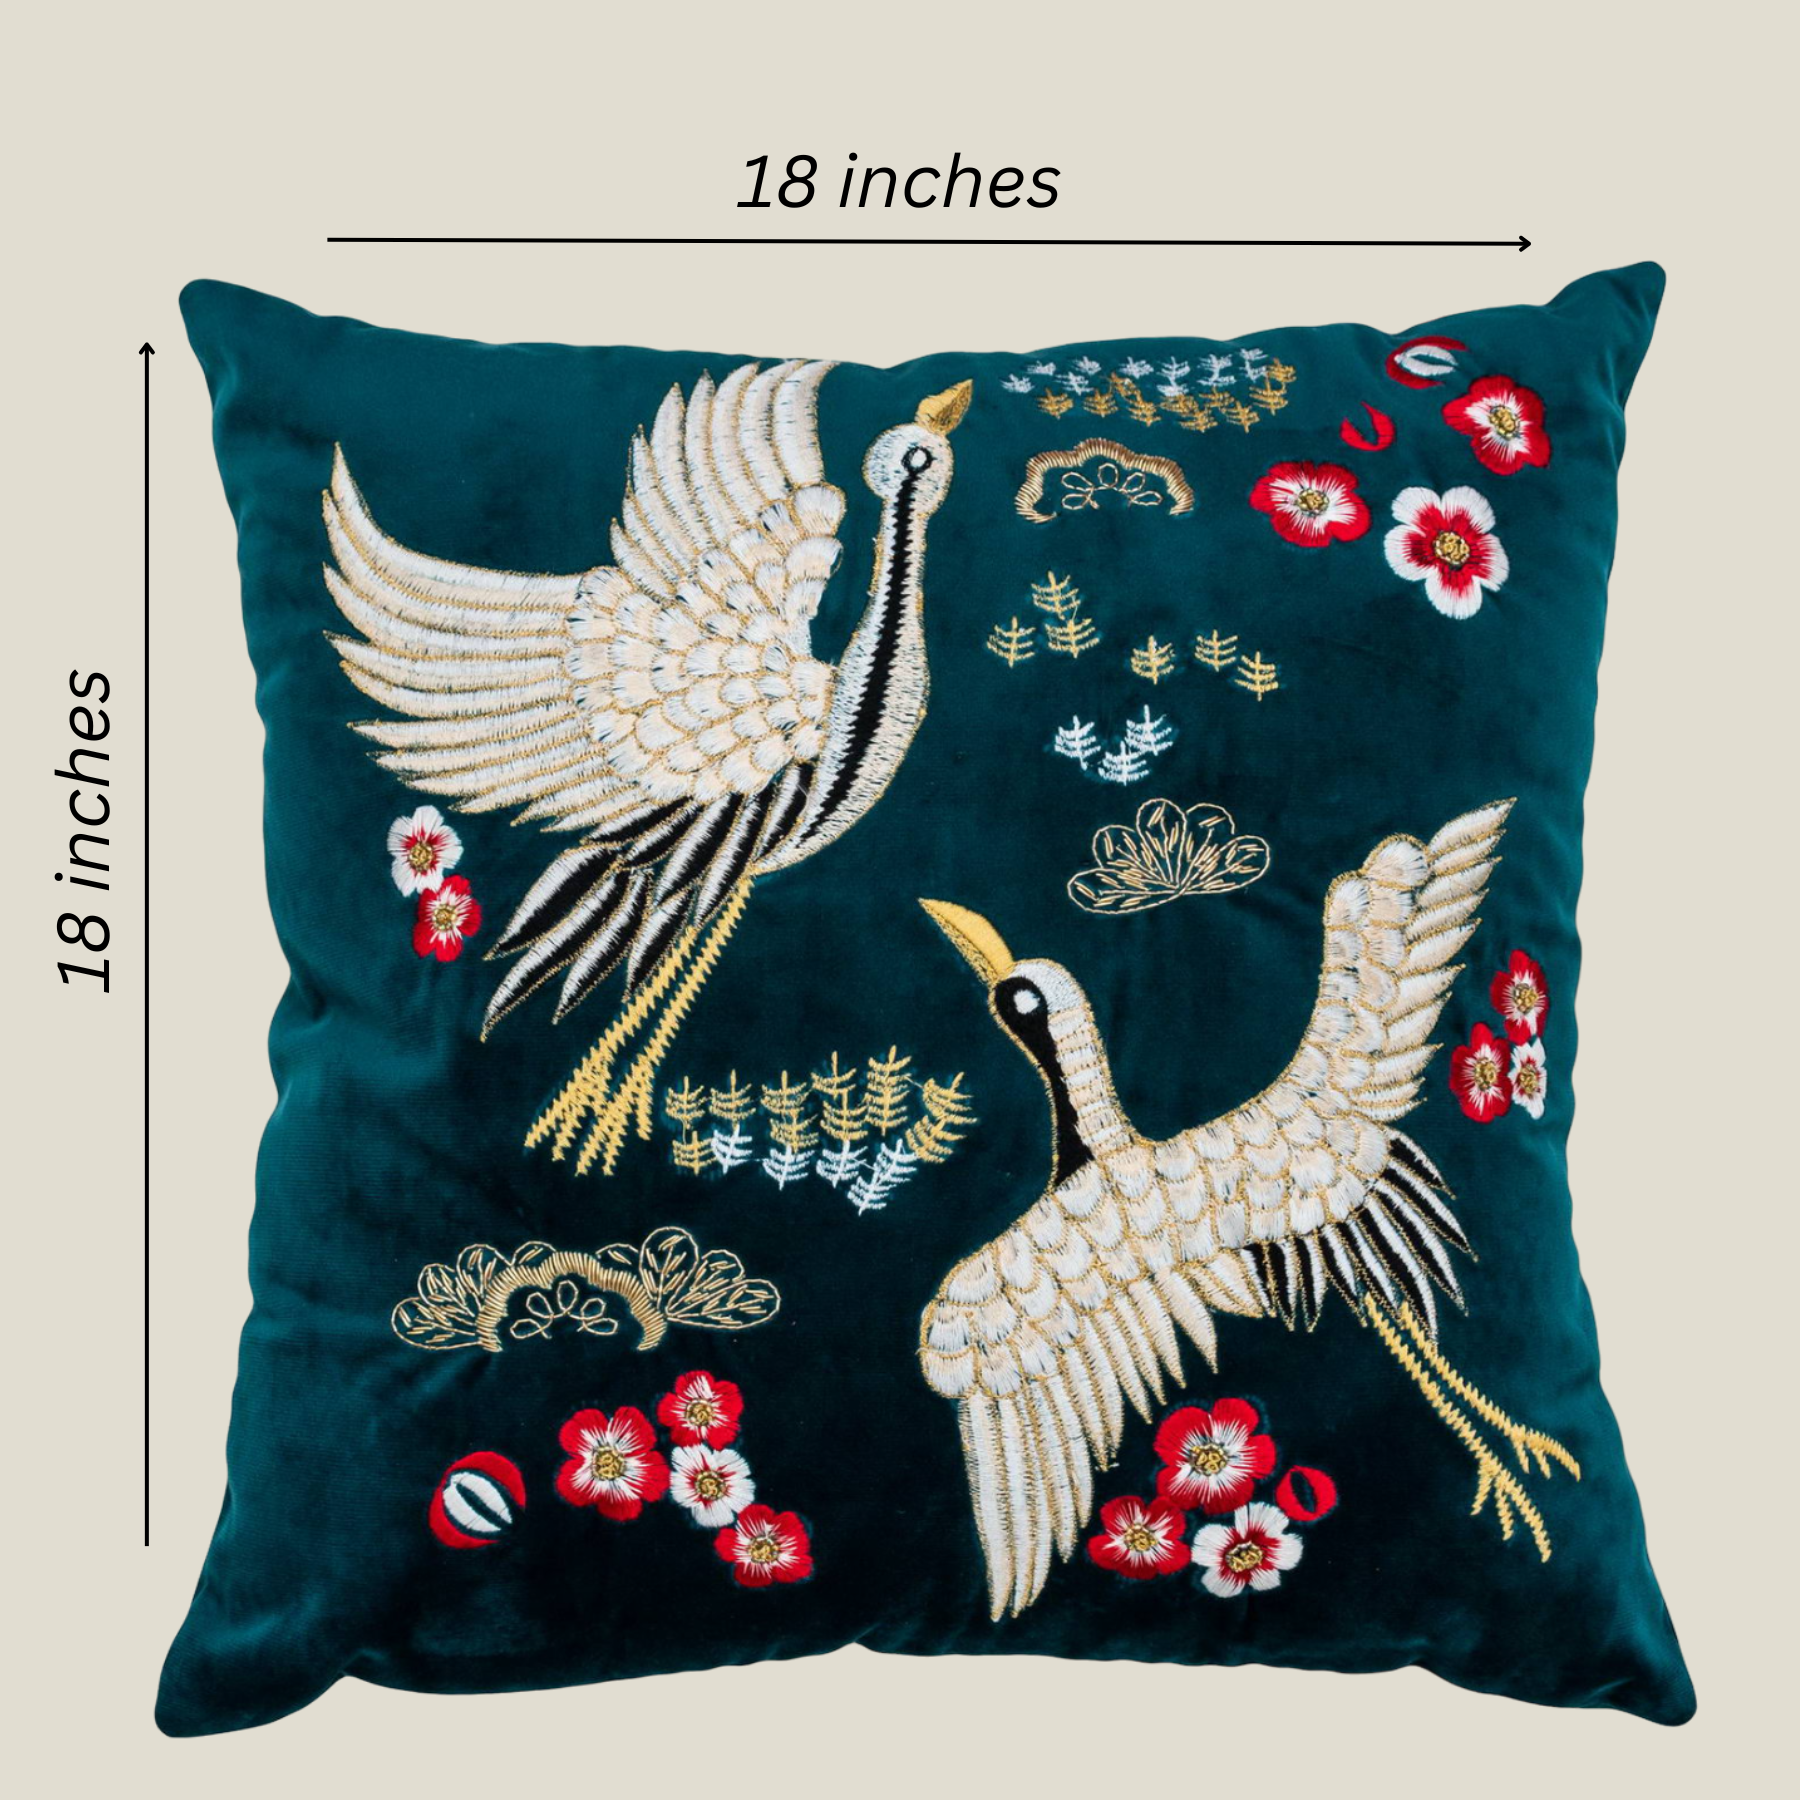 THE LUXELIFE GREEN EMBROIDERED FAUNA CUSHION COVER